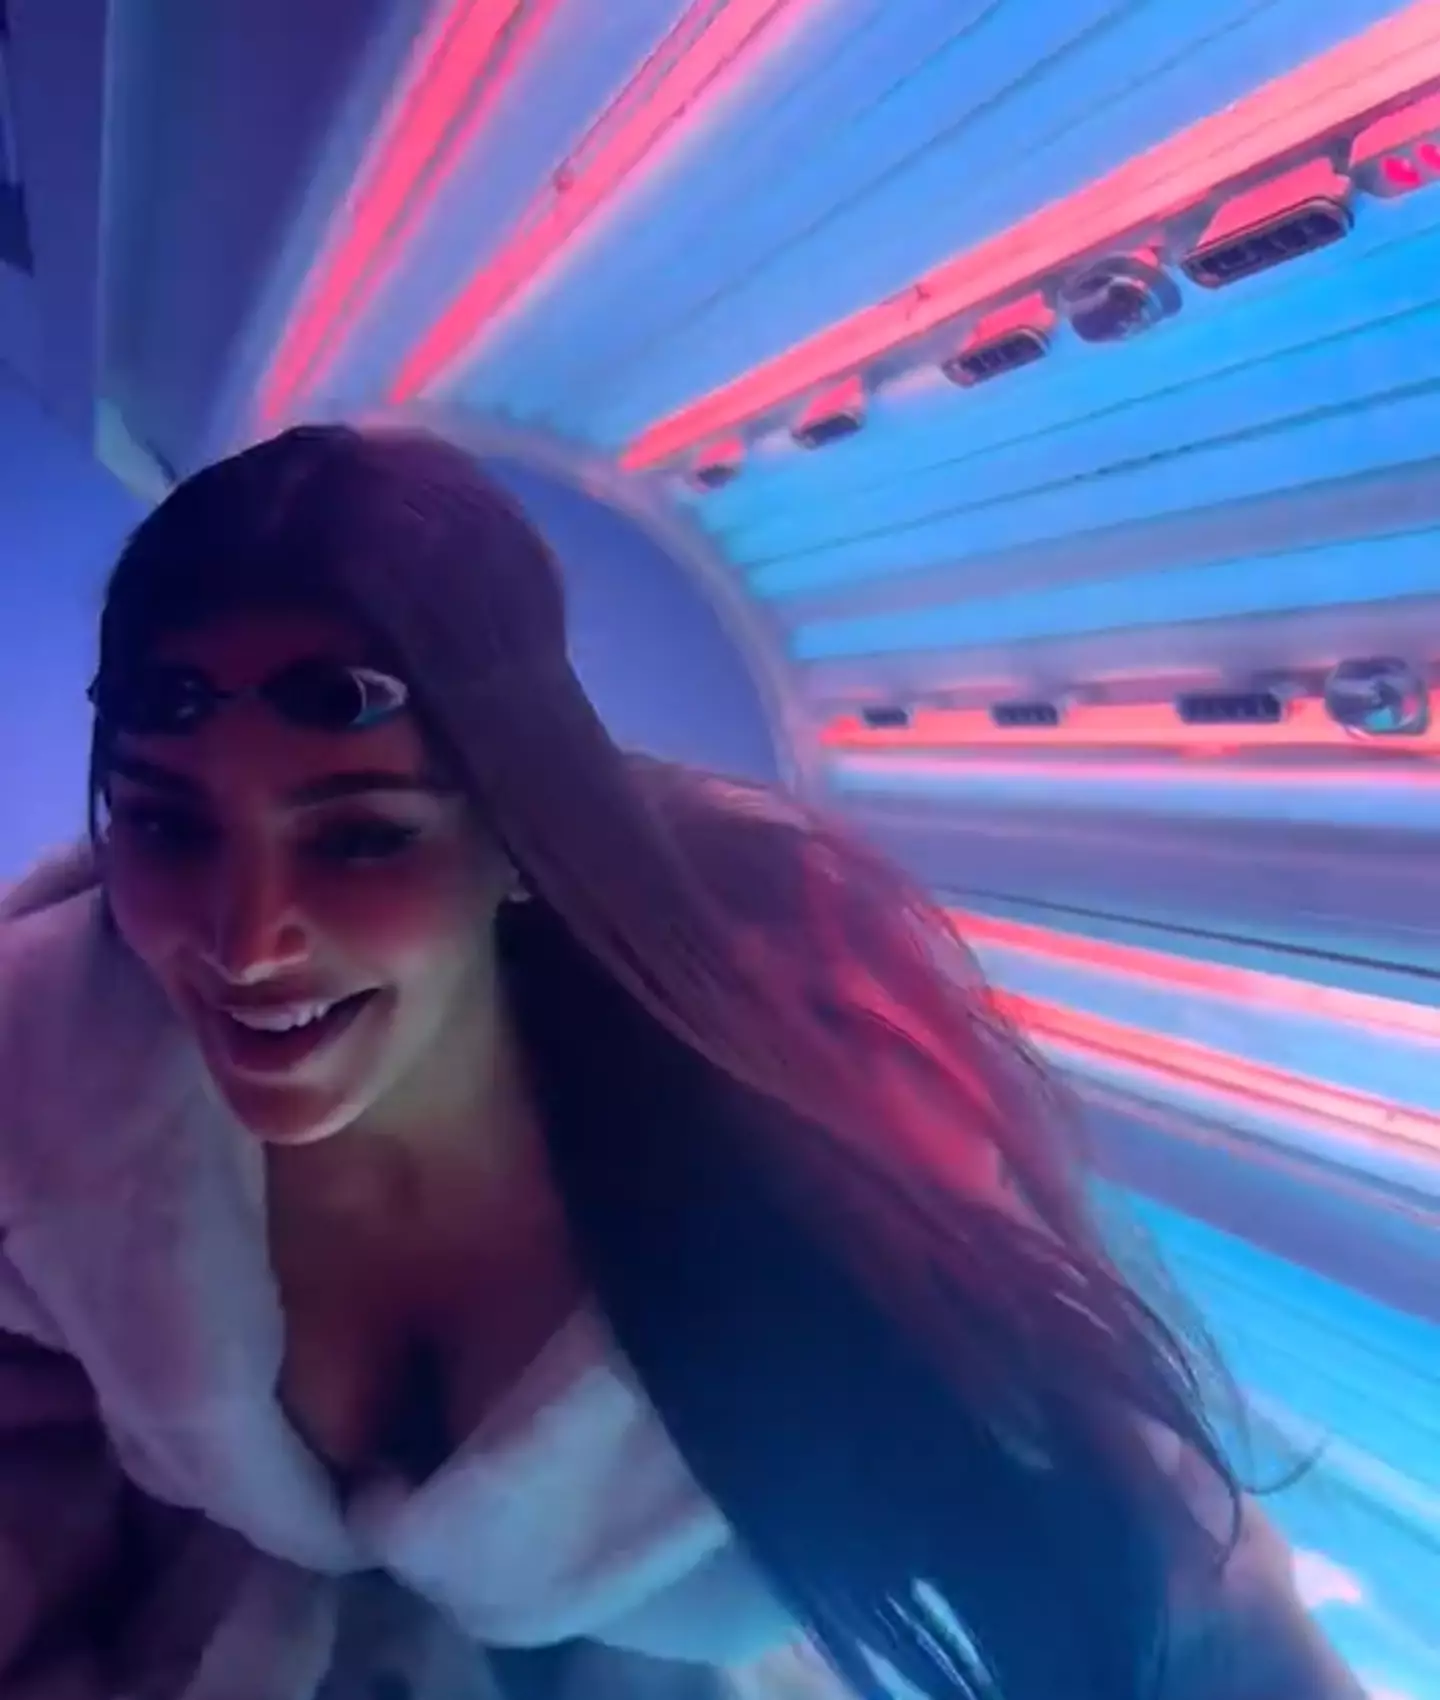 Do you have a tanning bed in your office? Of course, Kim Kardashian does.